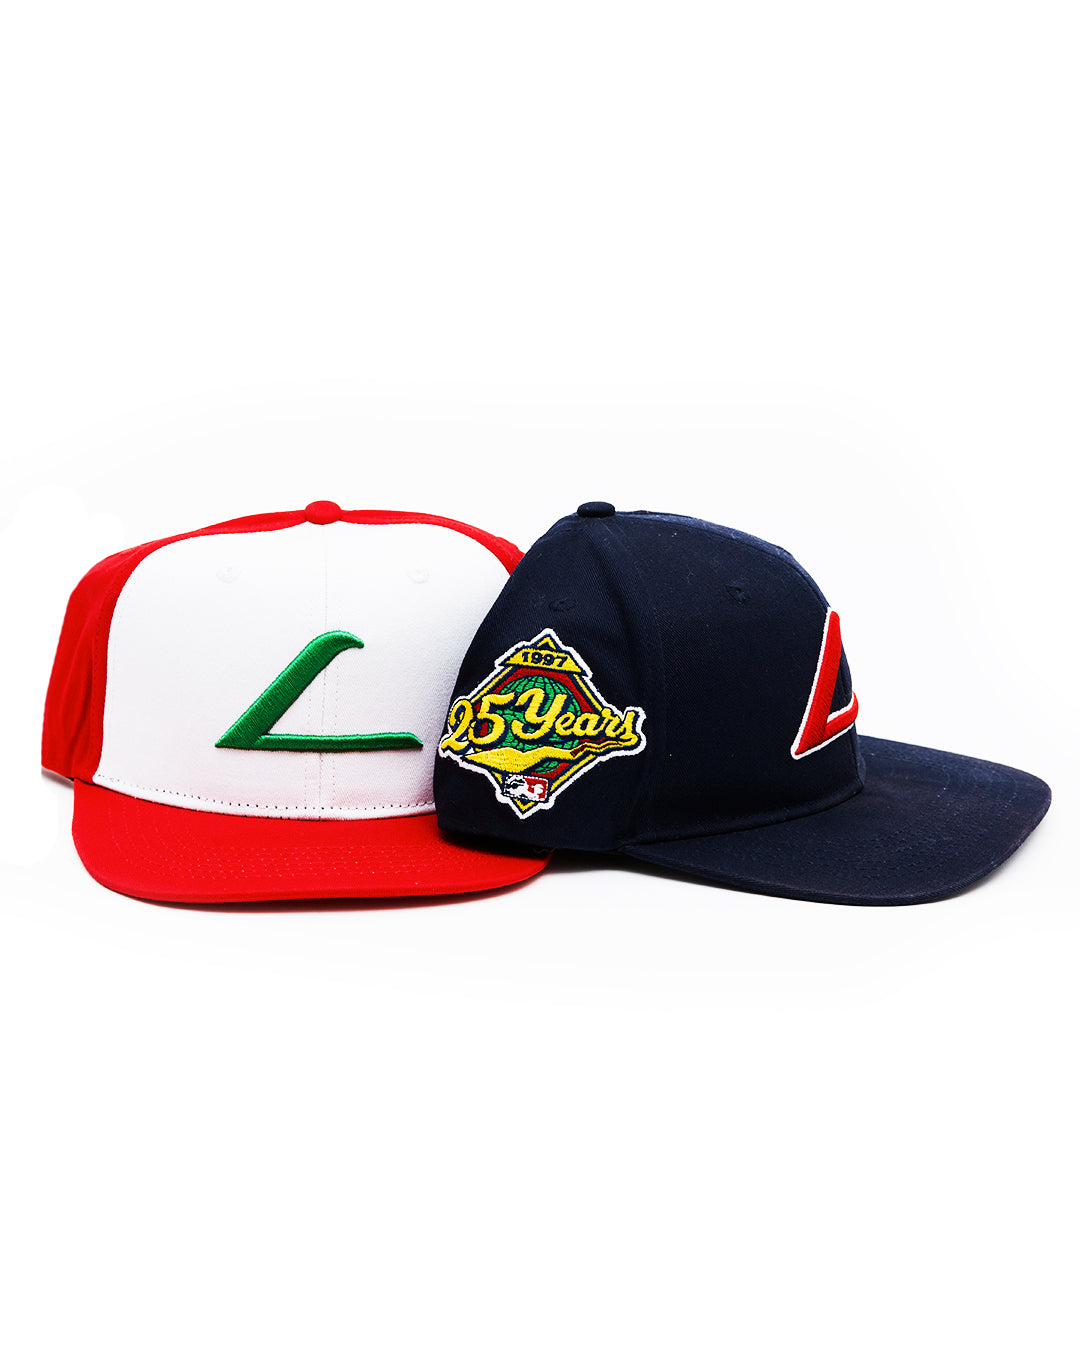 Official Pokémon League Expo Hat - 25 Year Anniversary Edition